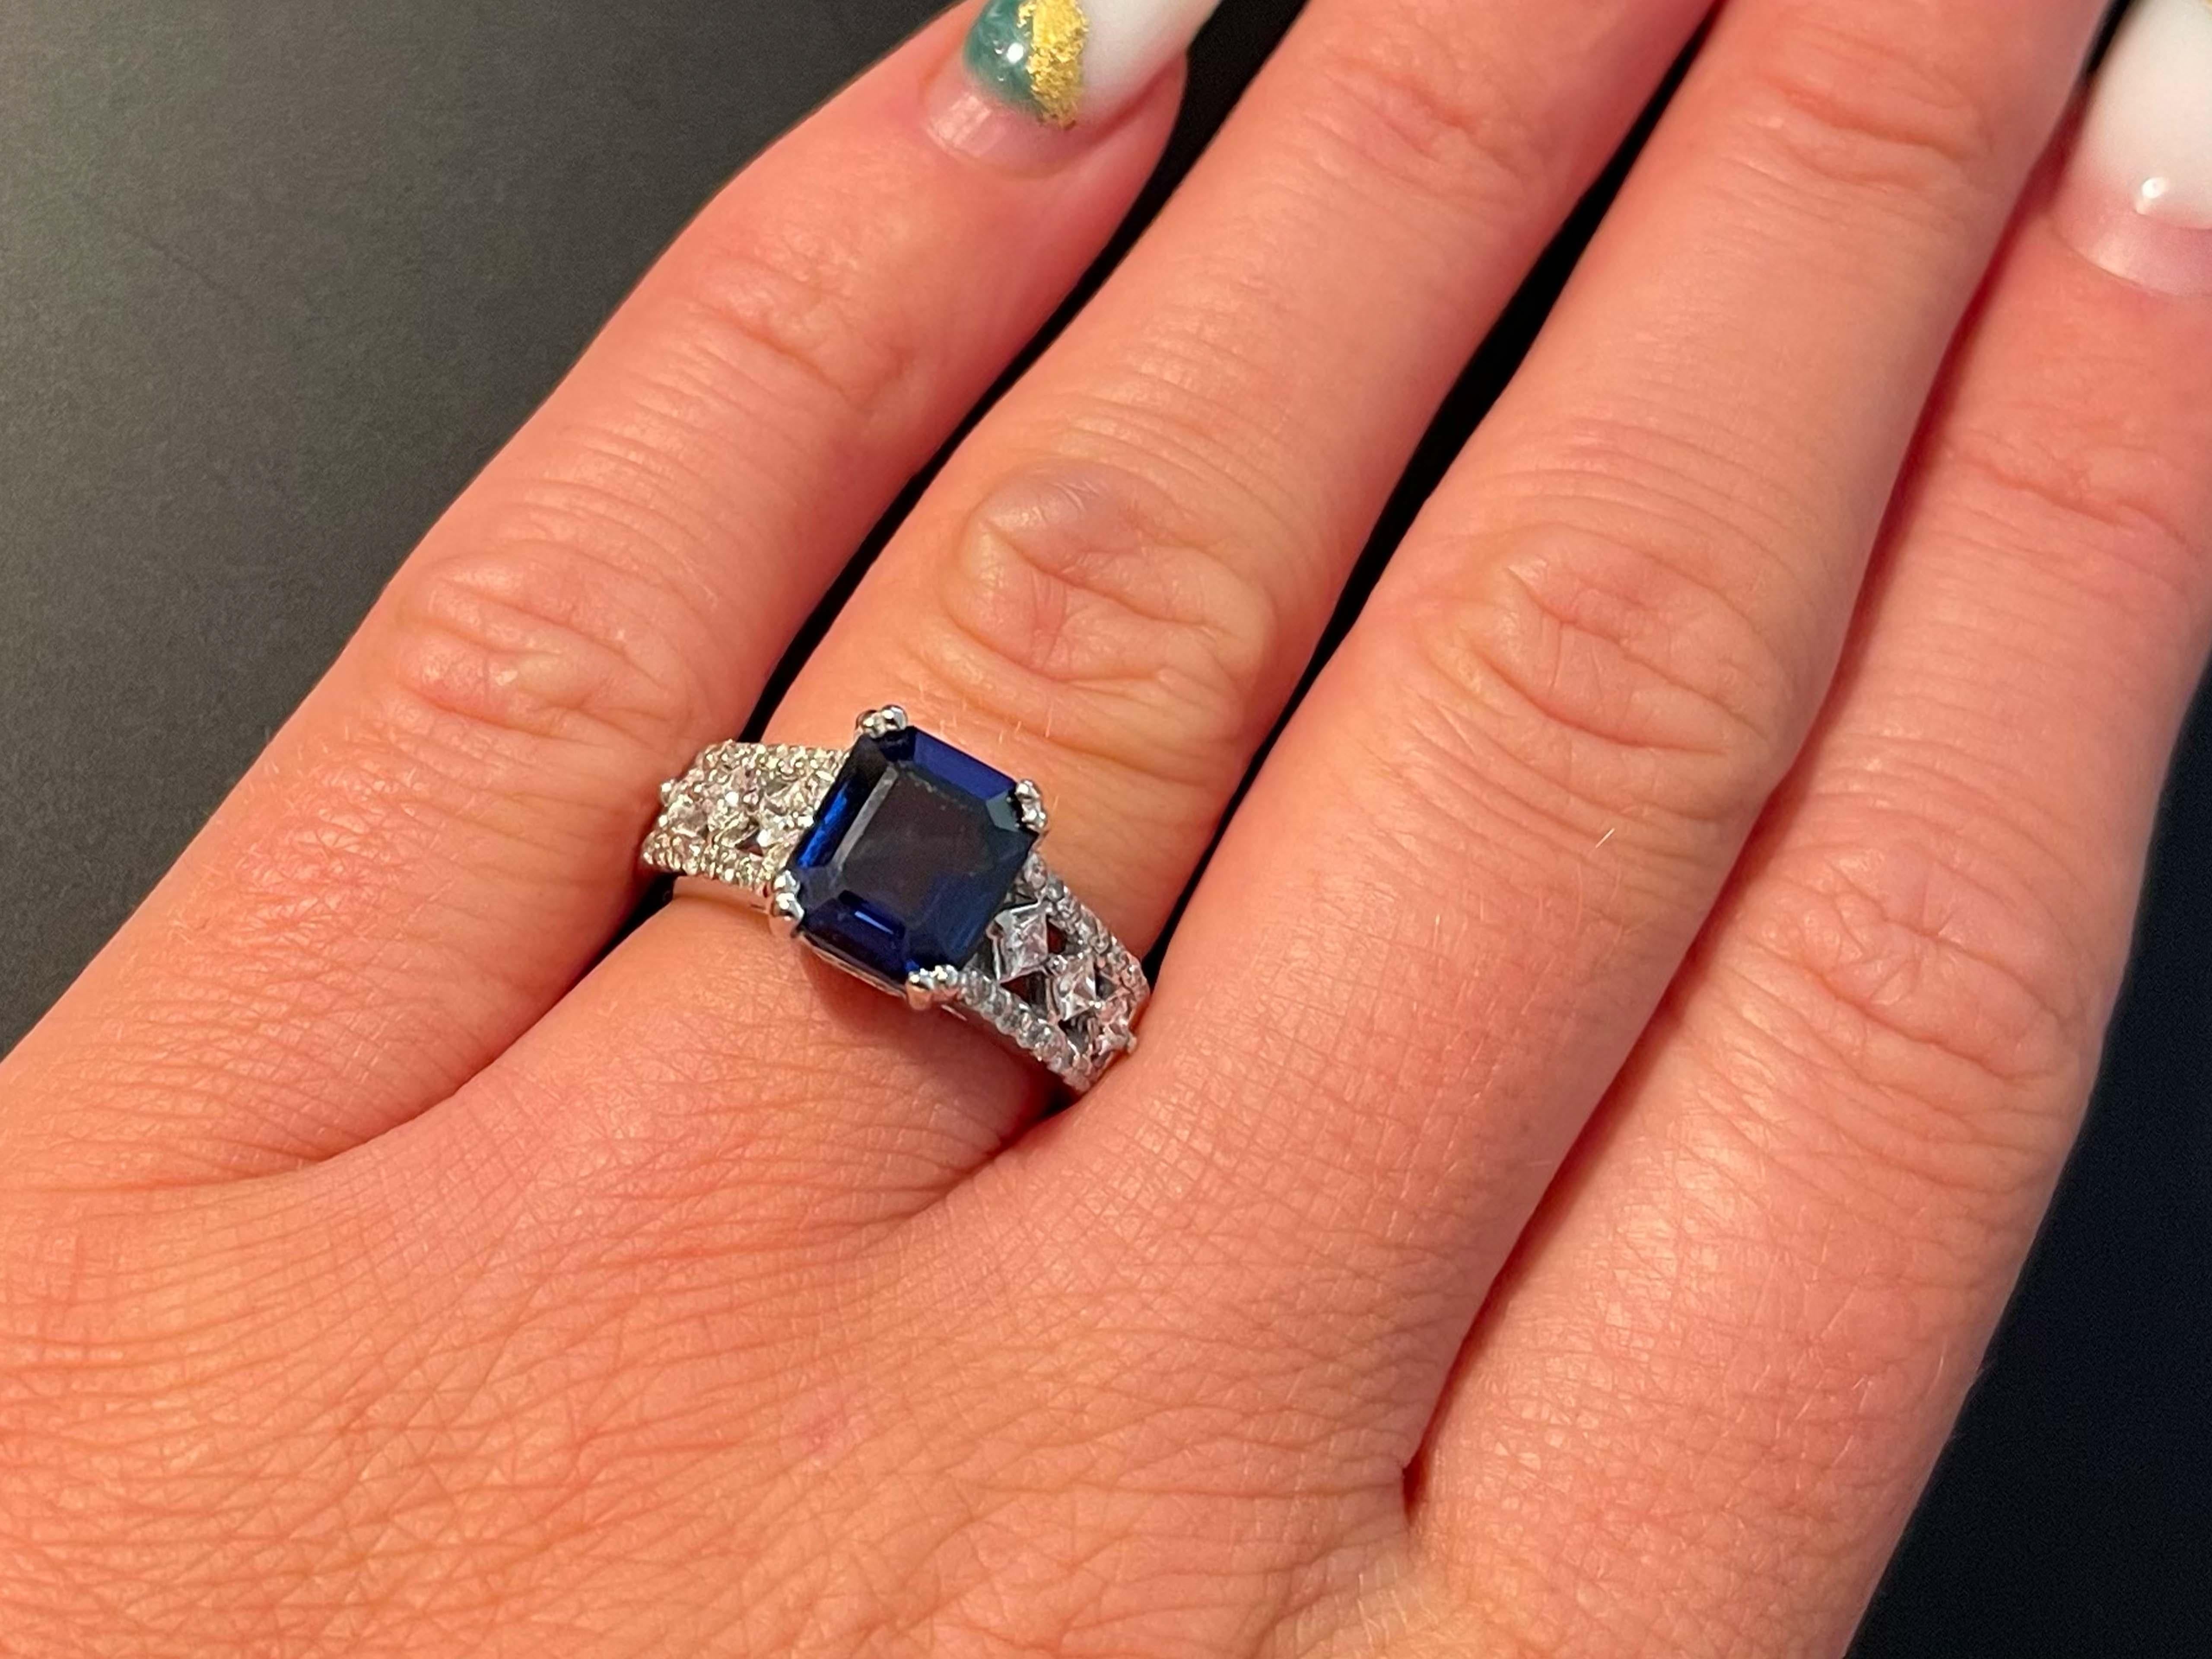 GIA Blue Sapphire Diamond Ring in 14k White Gold. This majestic 3 carat, octagonal, emerald cut, transparent, natural corundum sapphire gemstone is a real show stopper. Featuring a rich dark blue color that resembles the deep blue waters of the